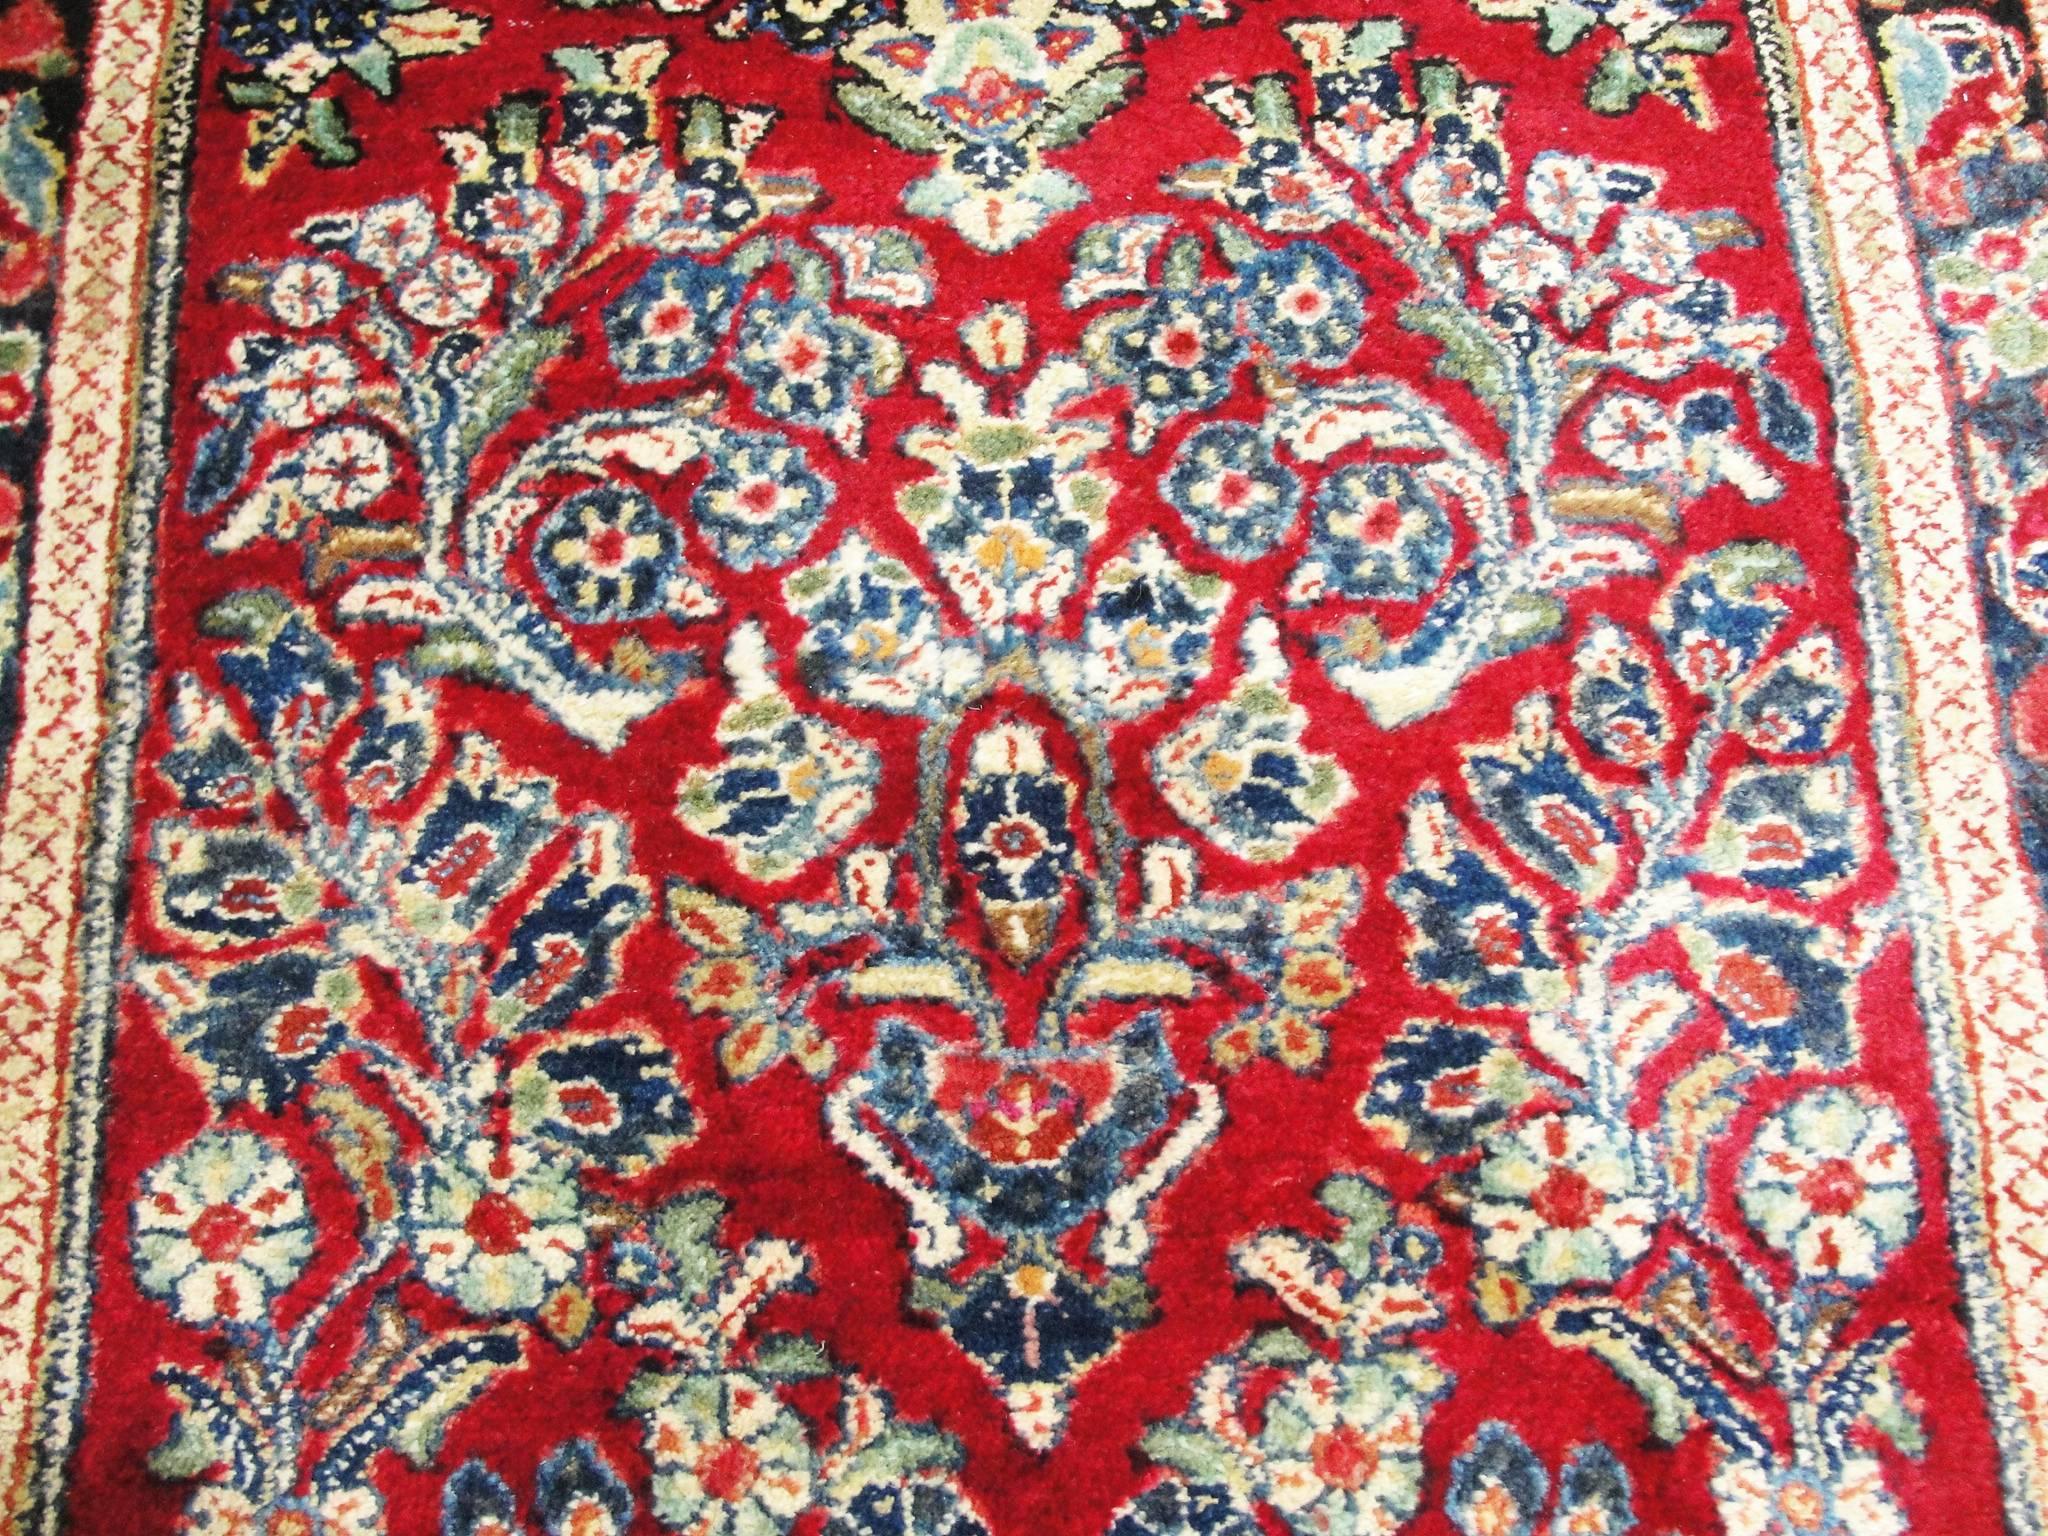 Antique Persian Sarouk Runner  In Excellent Condition For Sale In Evanston, IL